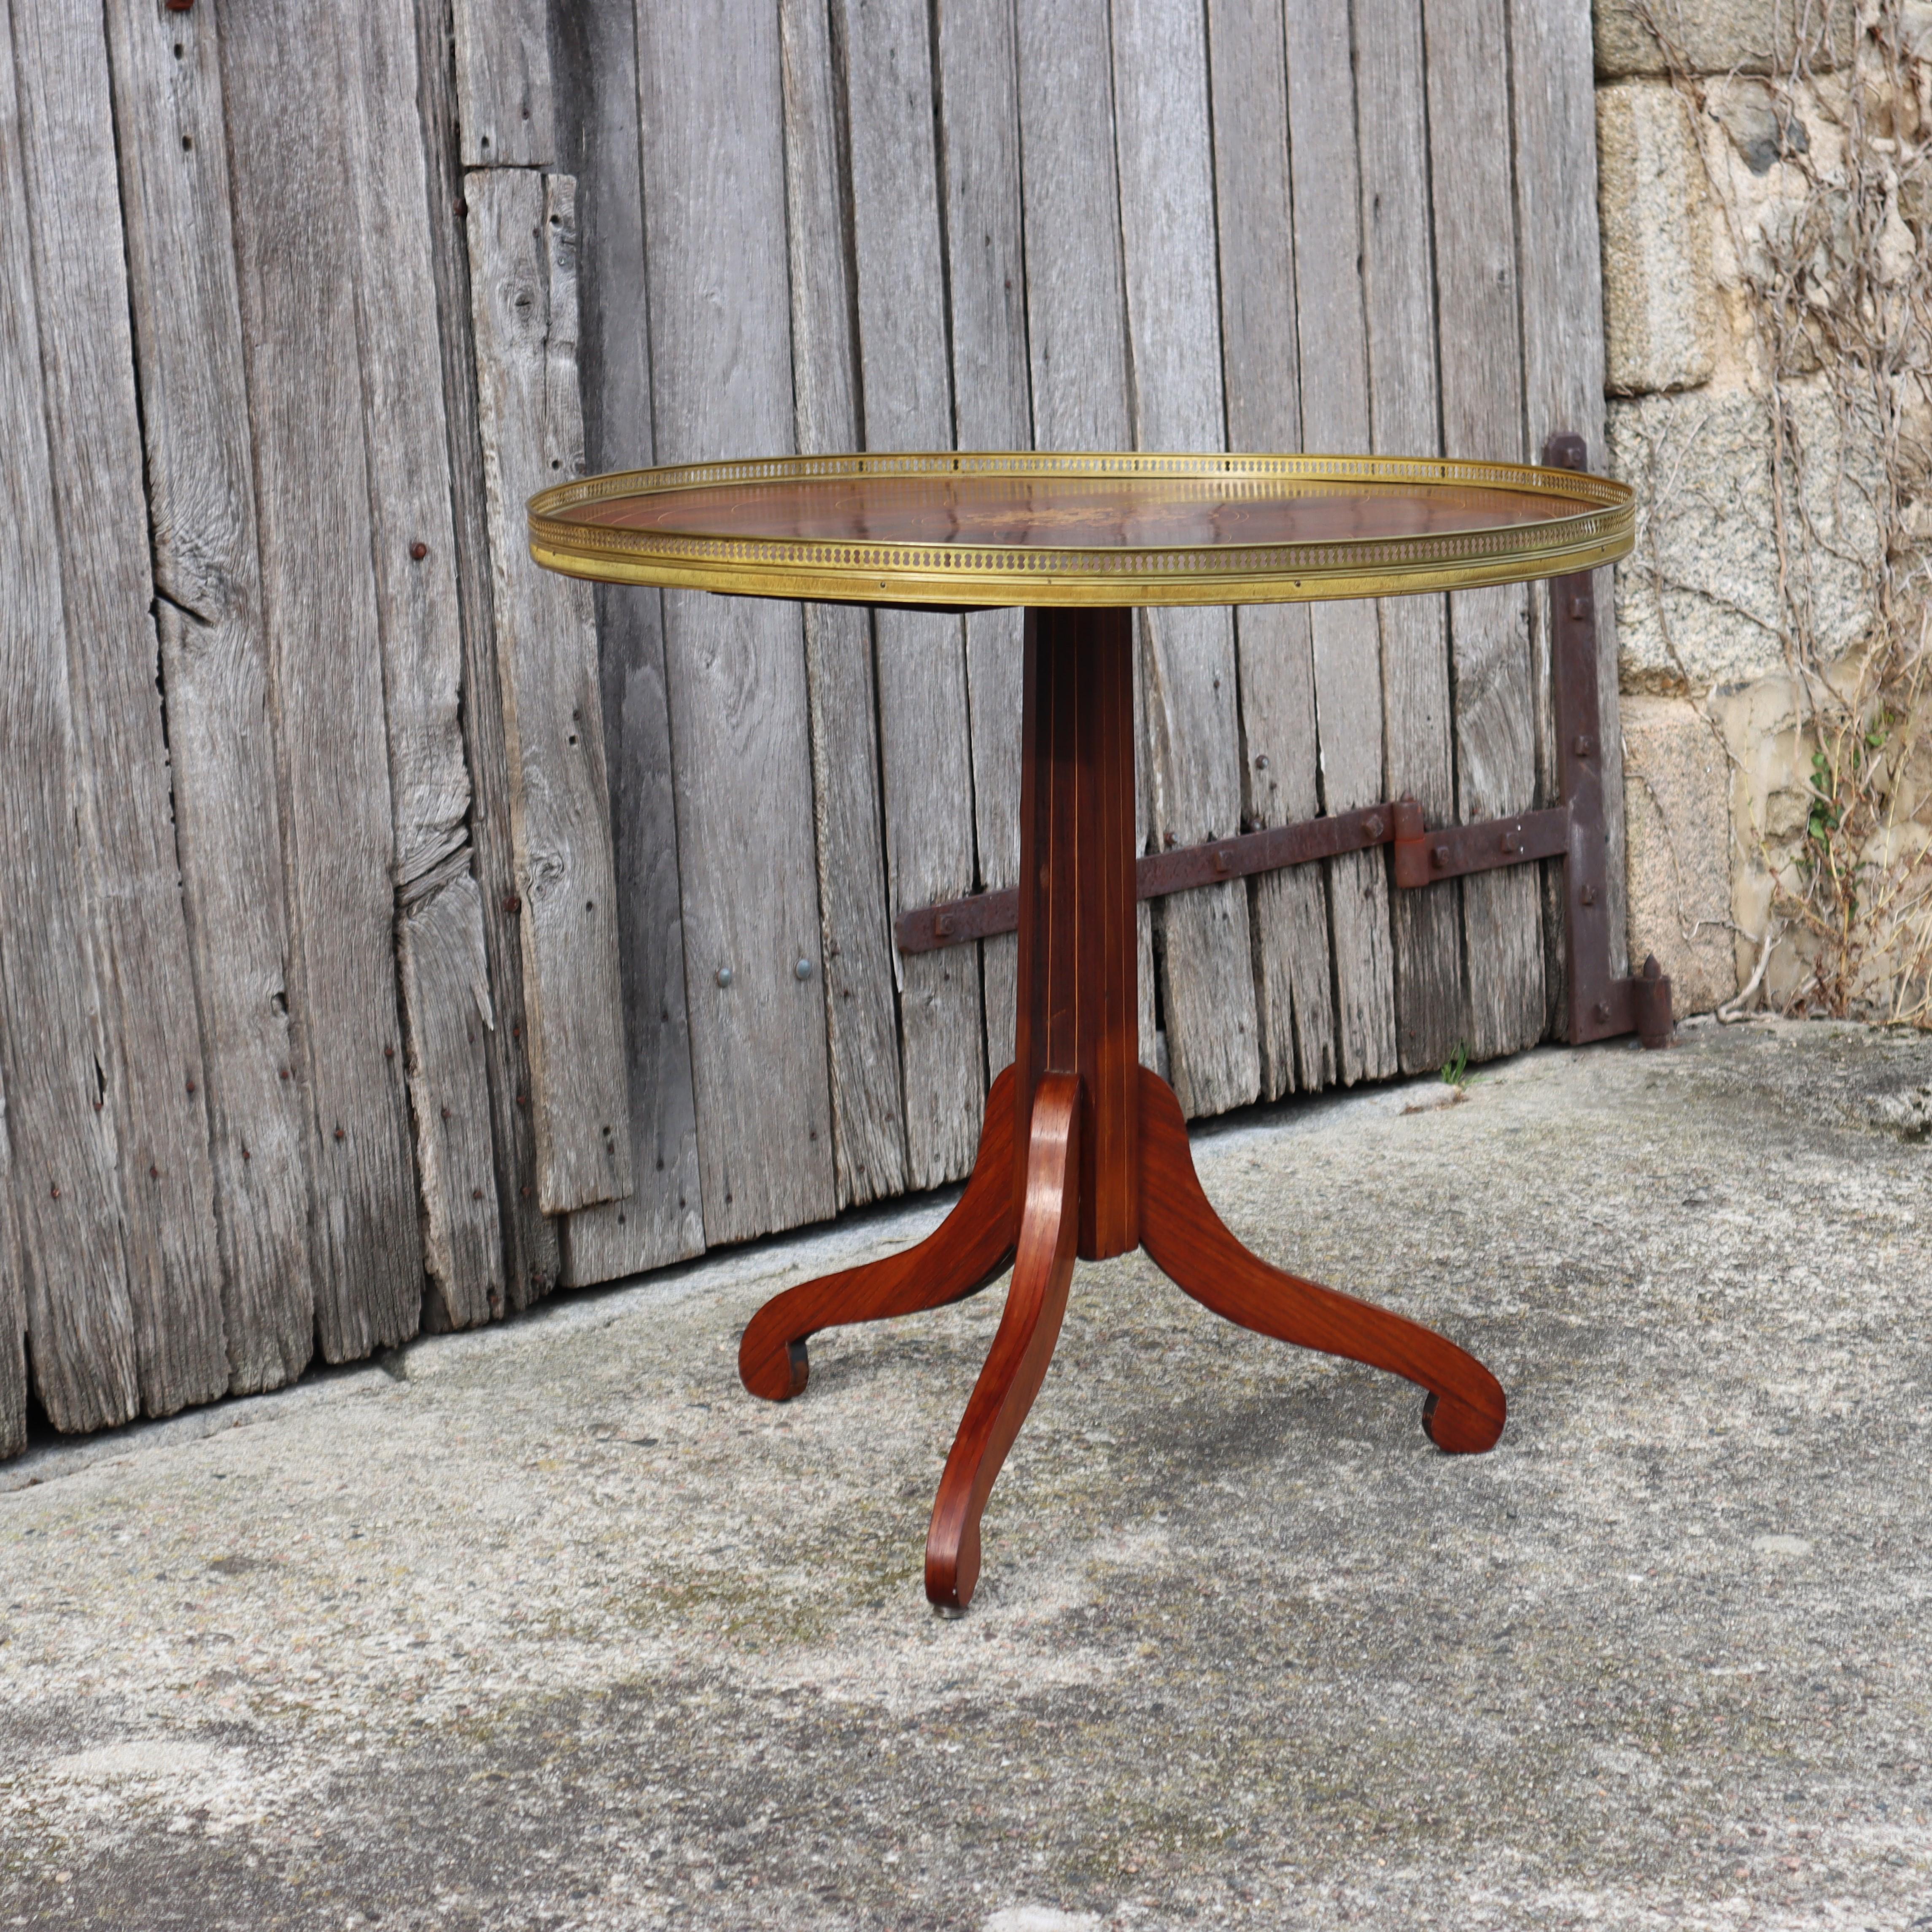 Vintage Neoclassical  Pedestal Table- Inlay work - Brass Gallery-60s For Sale 4